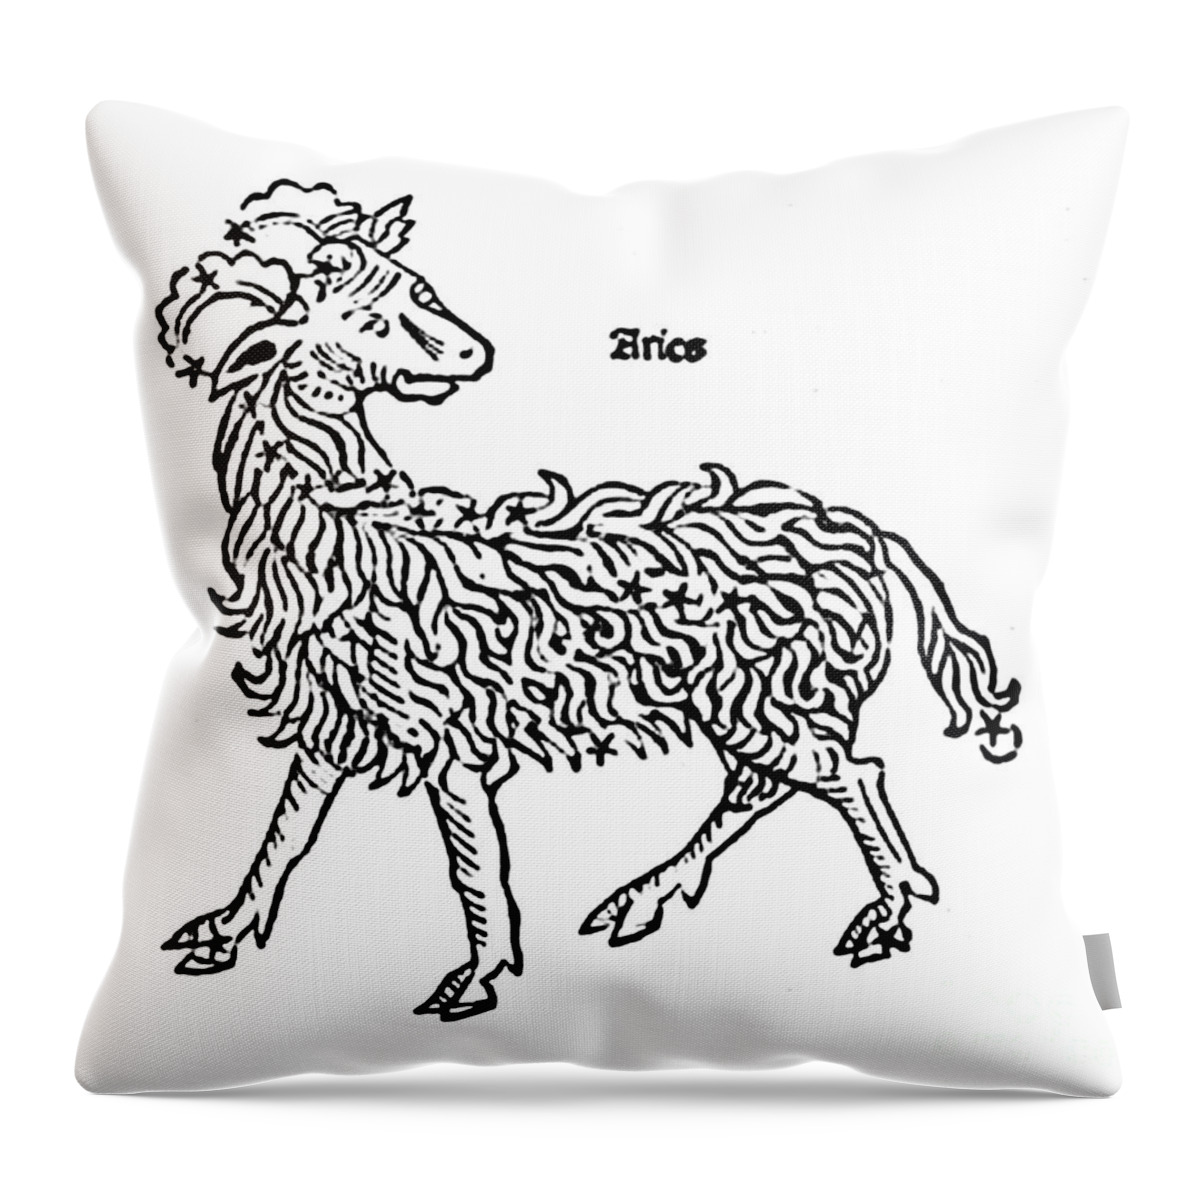 Aries Throw Pillow featuring the photograph Aries Constellation Zodiac Sign 1482 by Science Source